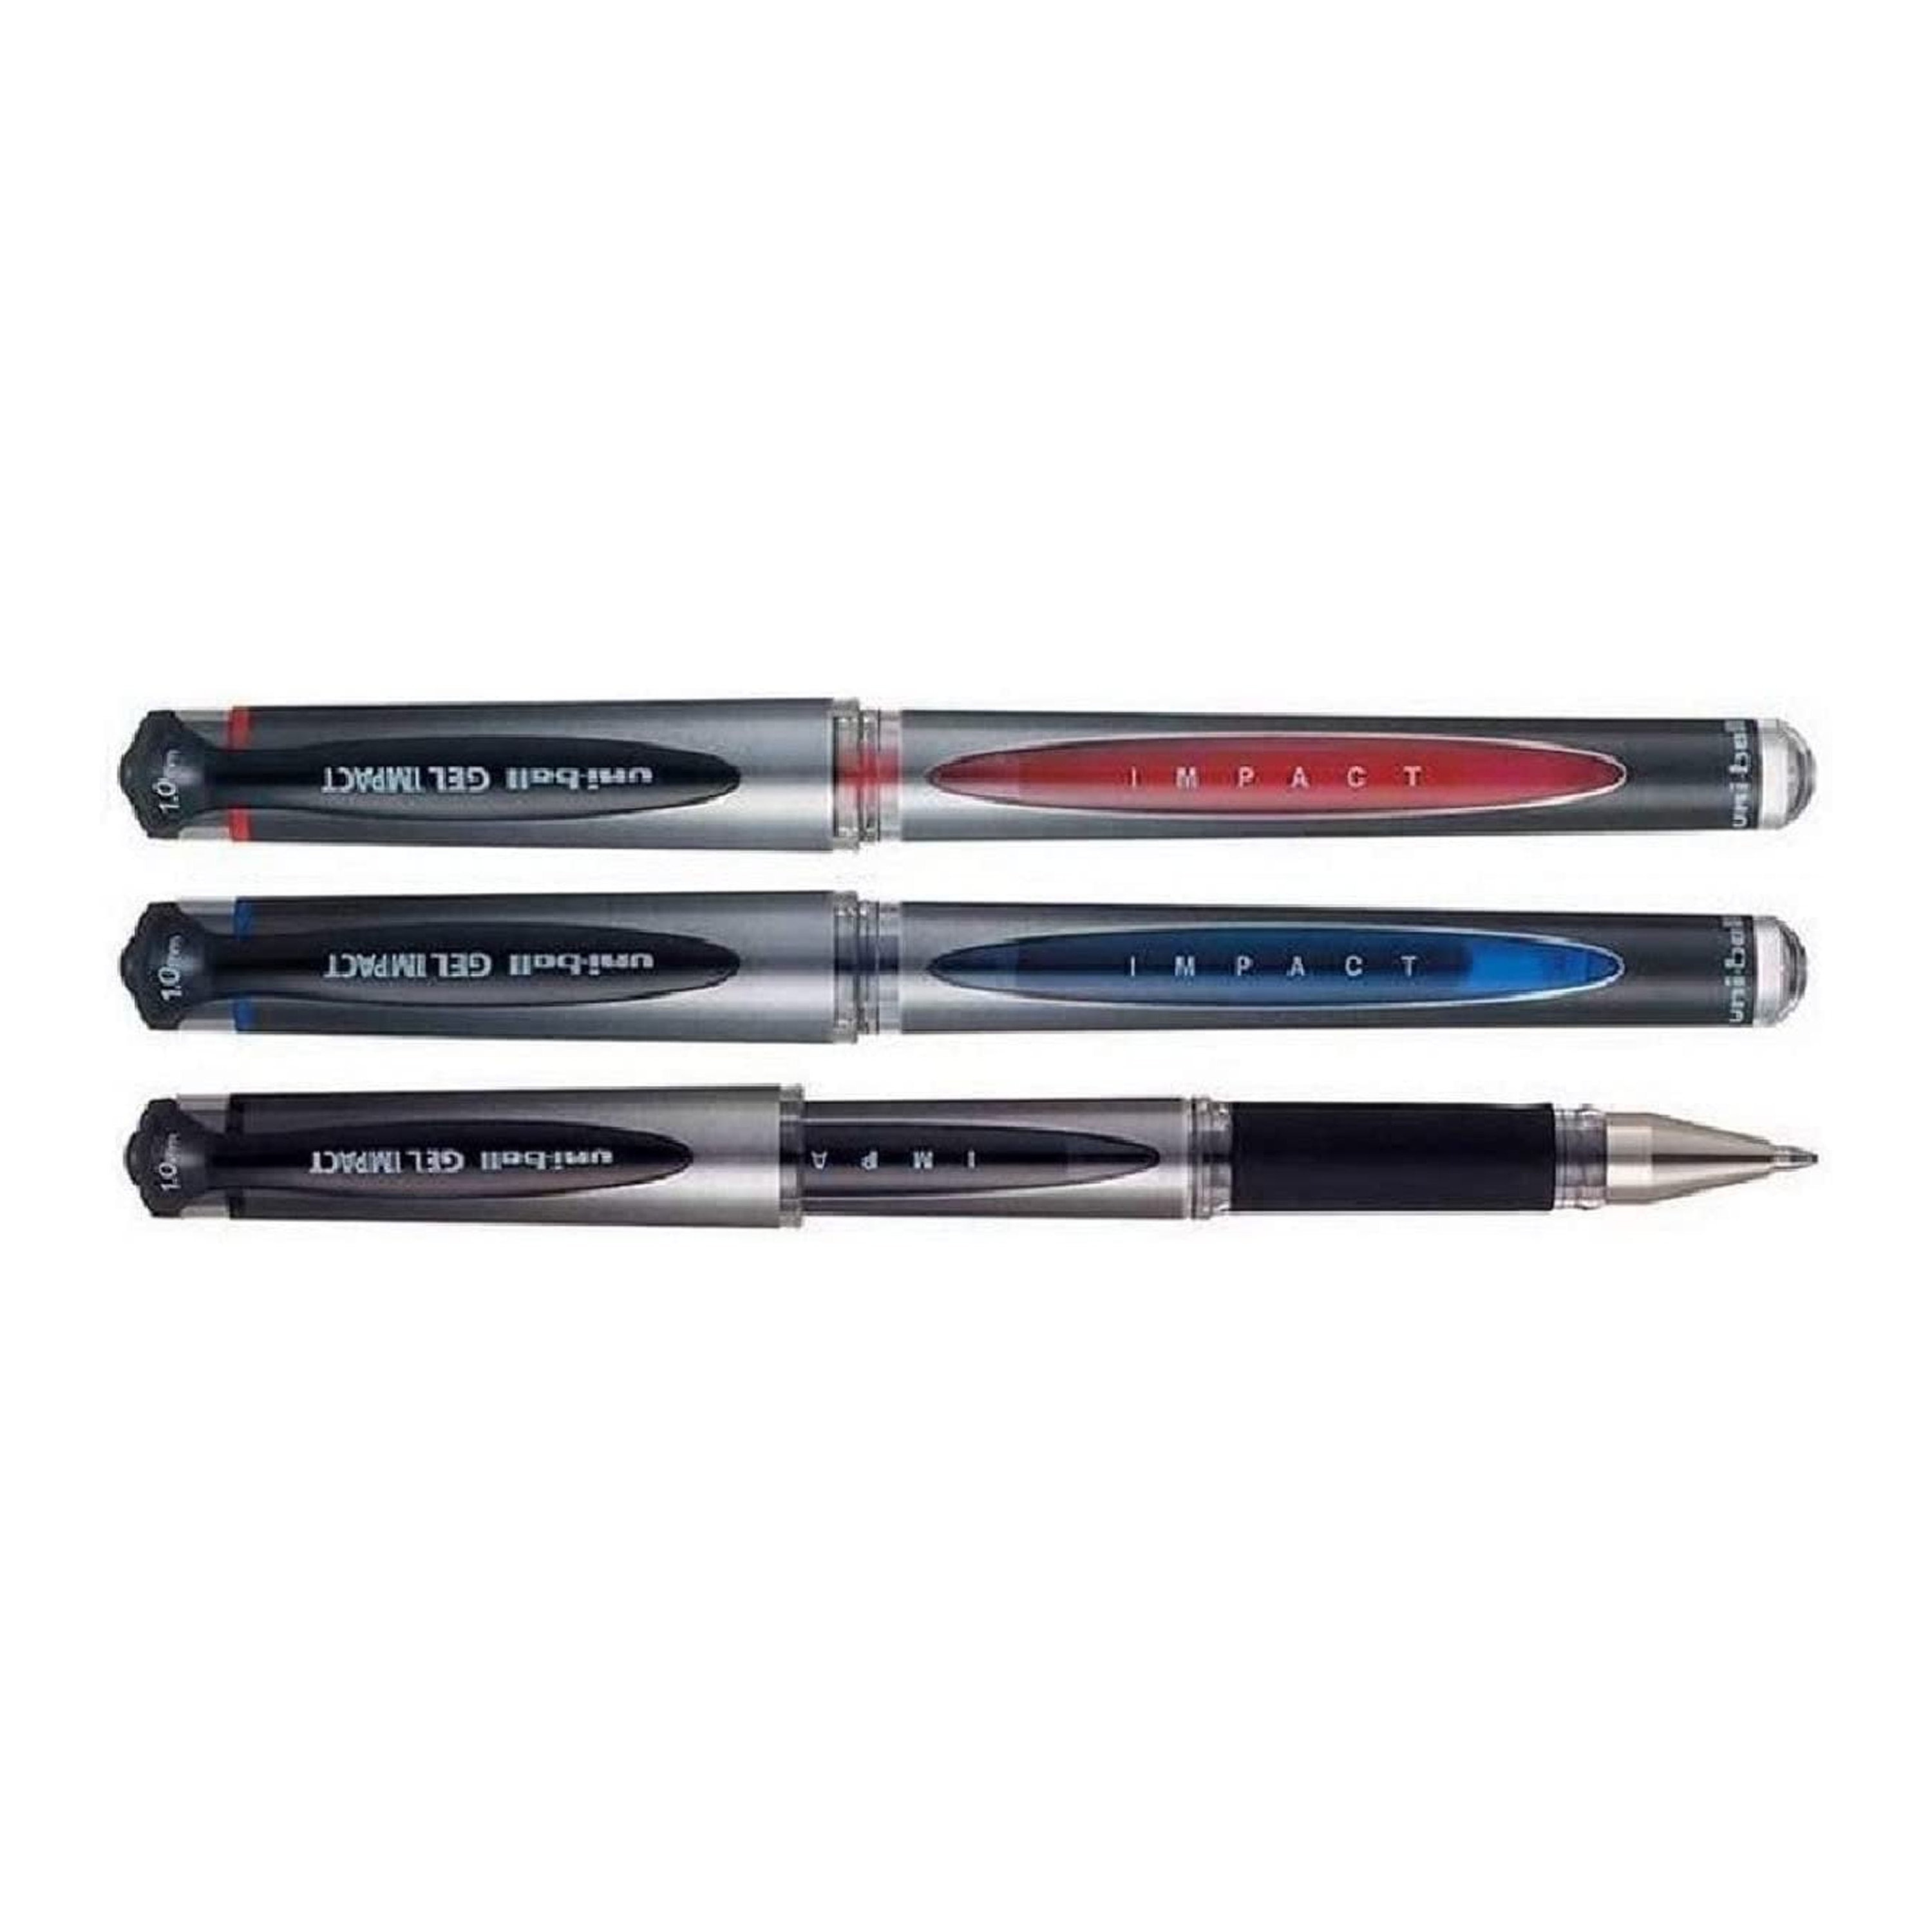 Uni Ball Assorted Colour Pack of Capped UM-153S Gel Impact Rollerball Pen  Broad 1mm Nib Tip 0.6mm Line Width Ink black Blue Red 3 Pens 